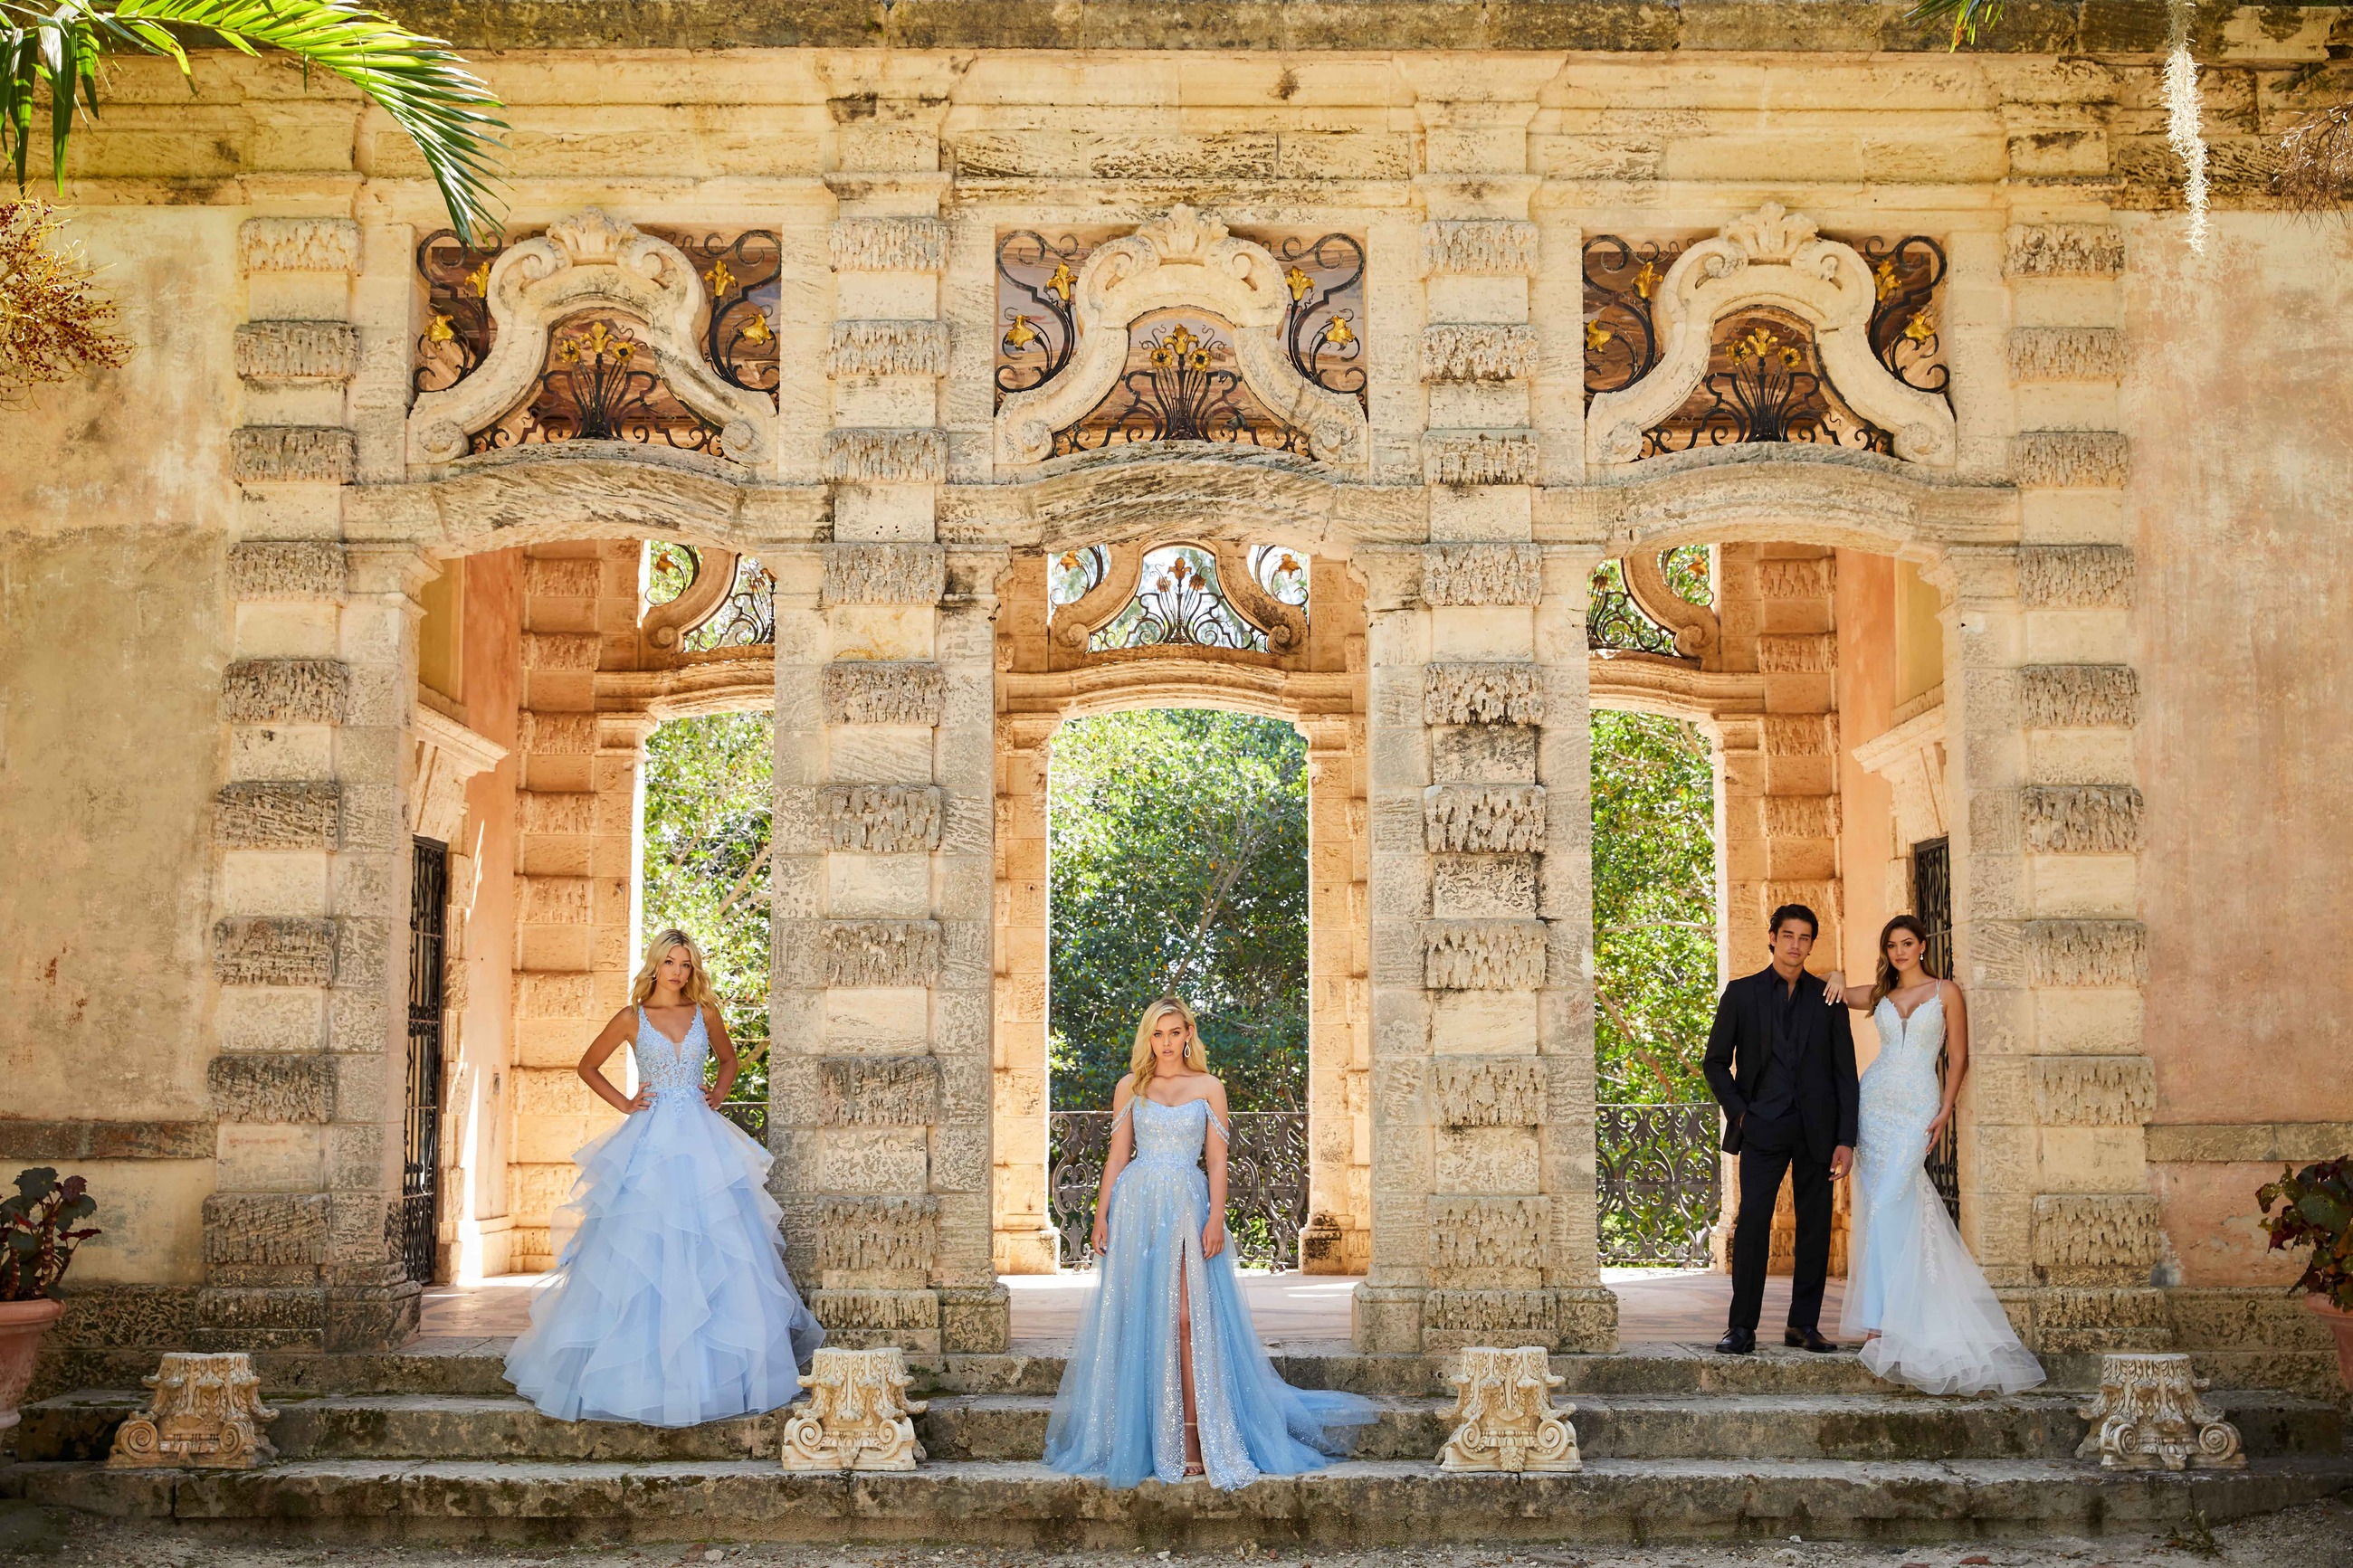 3 Girls wearing light blue dresses of different shapes in front of ancient entry. Front